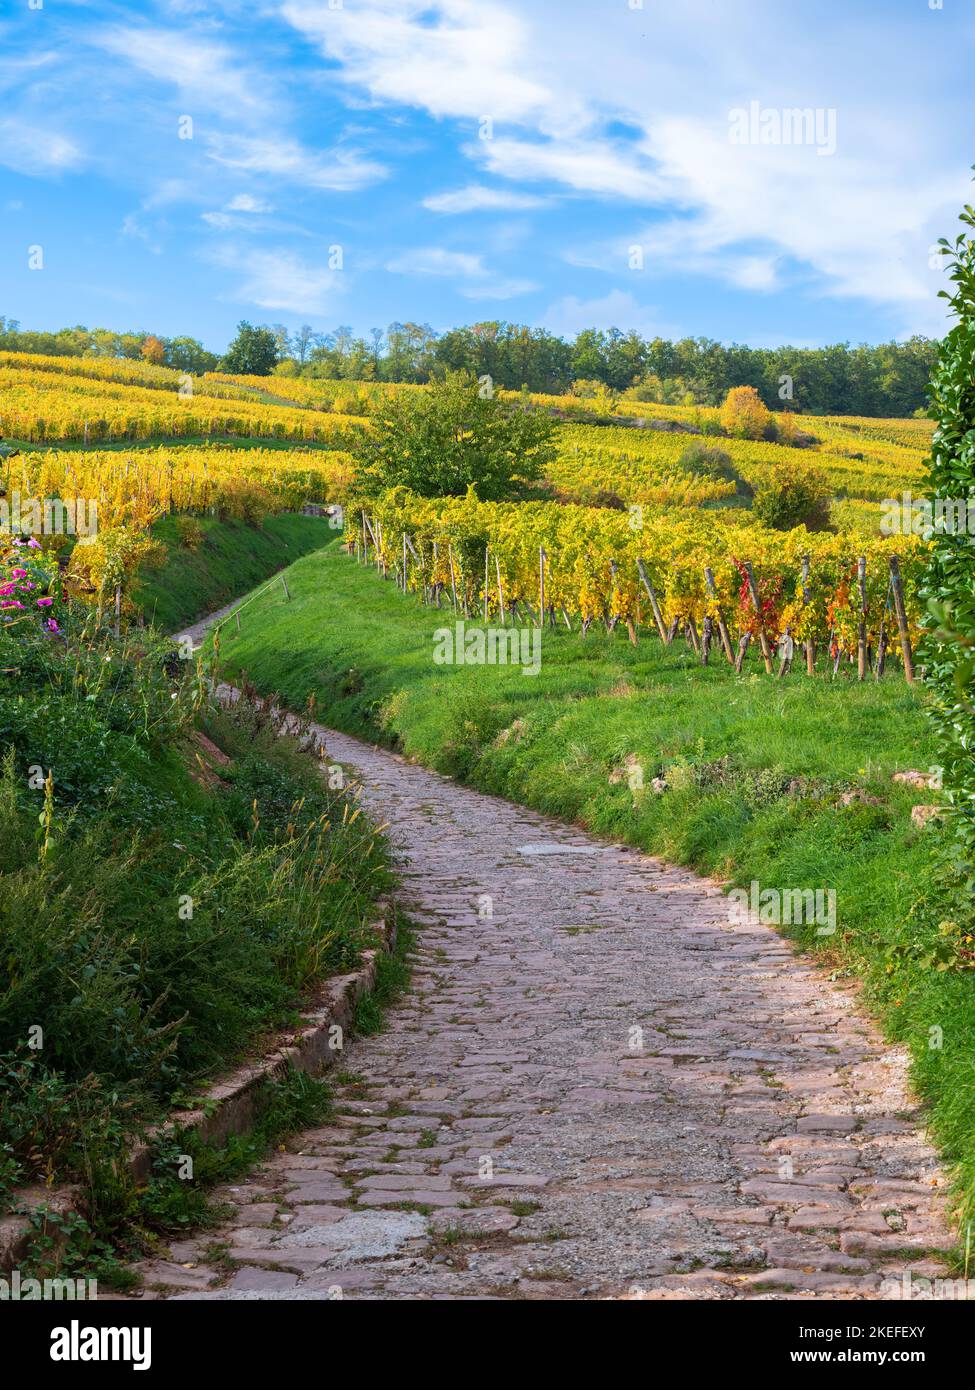 Vineyards along the famous wine route in Alsace, France Stock Photo